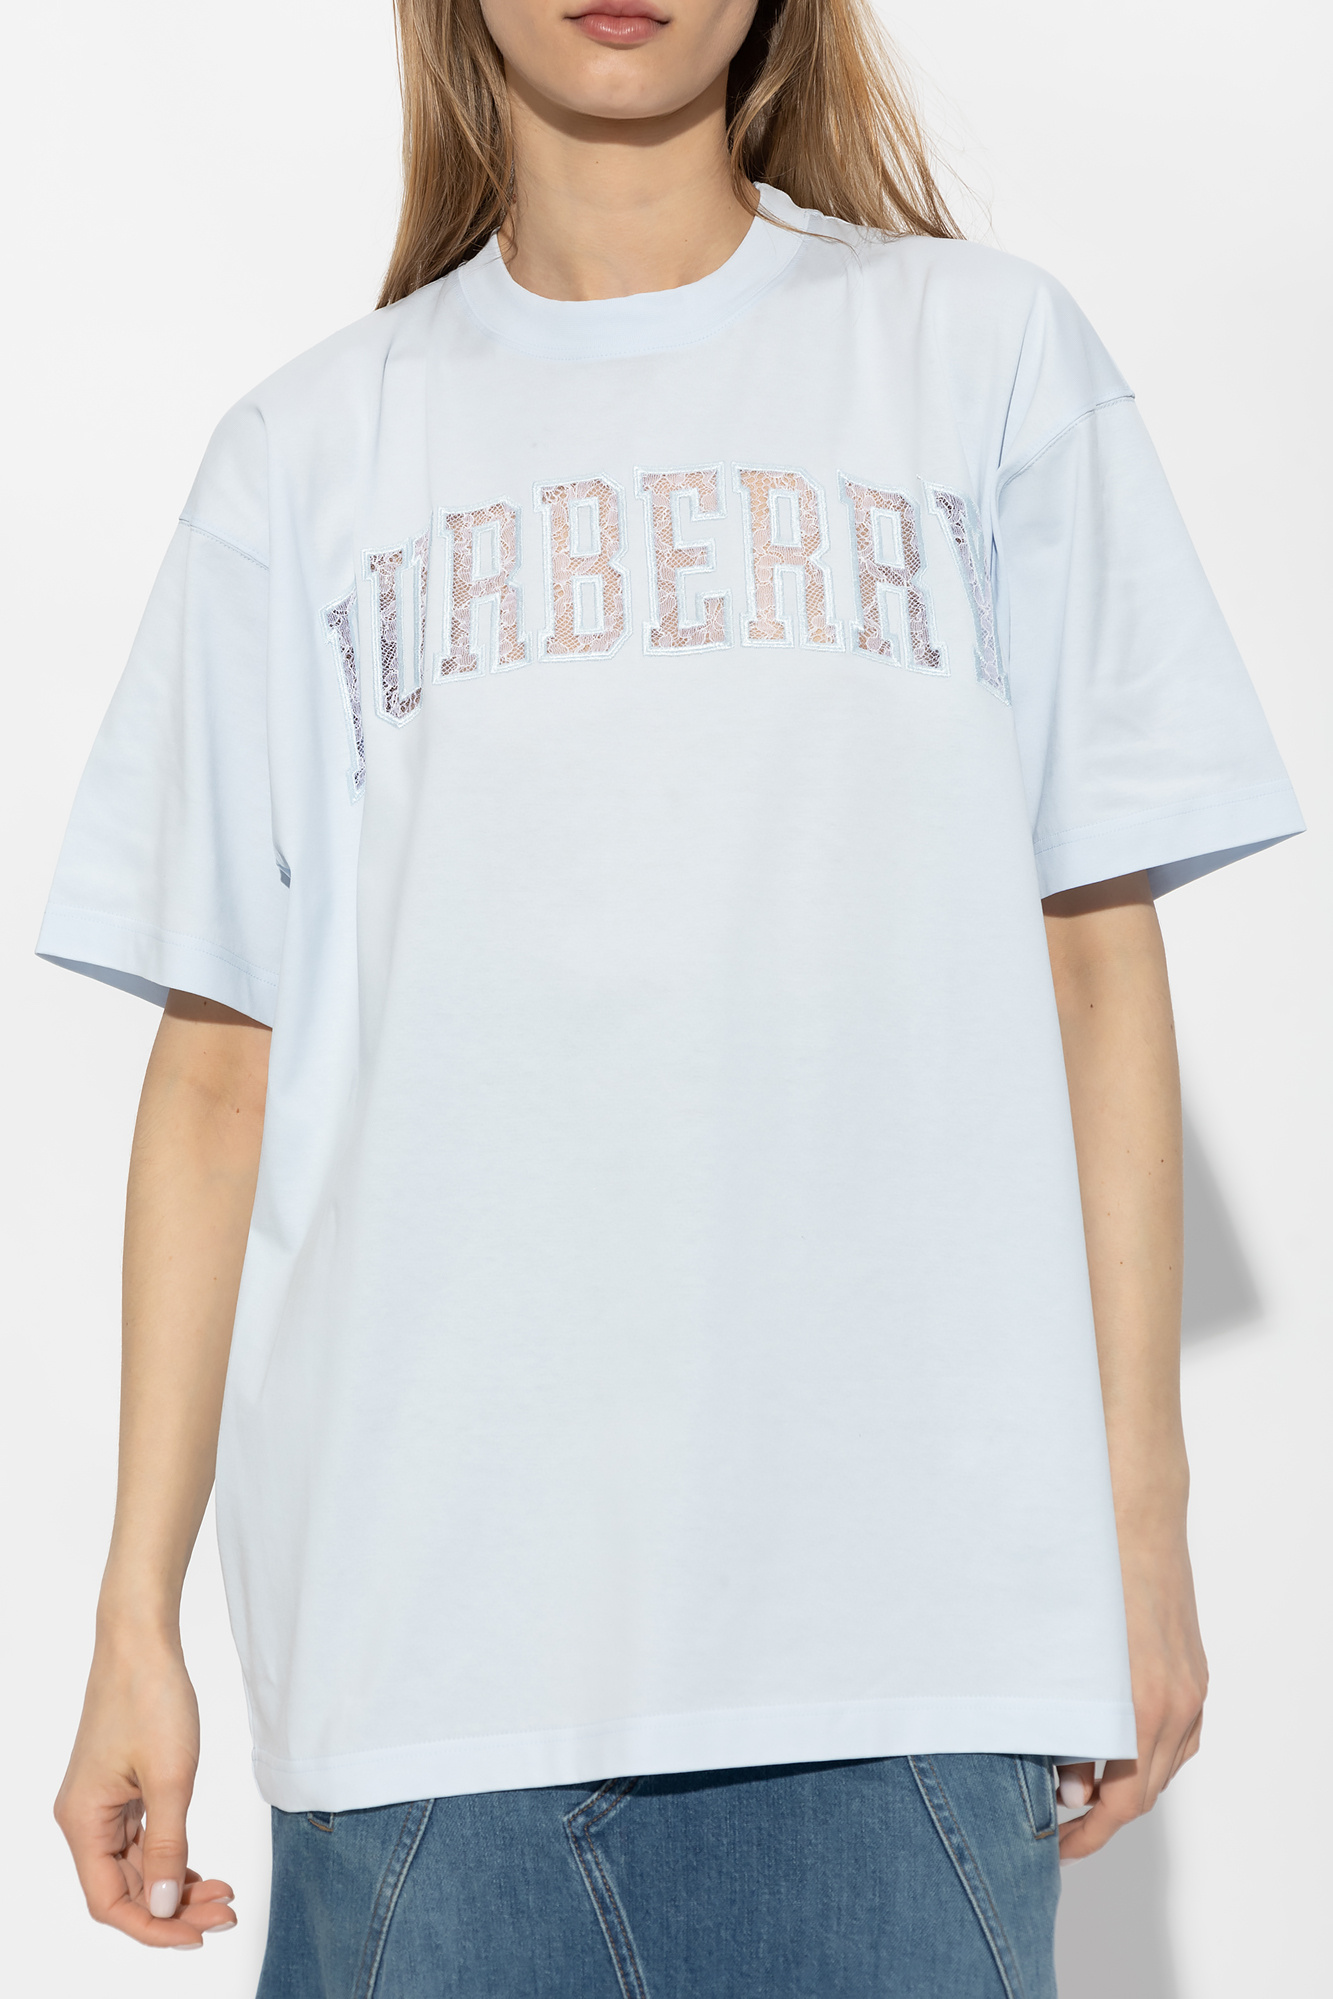 Burberry T-shirt with lace